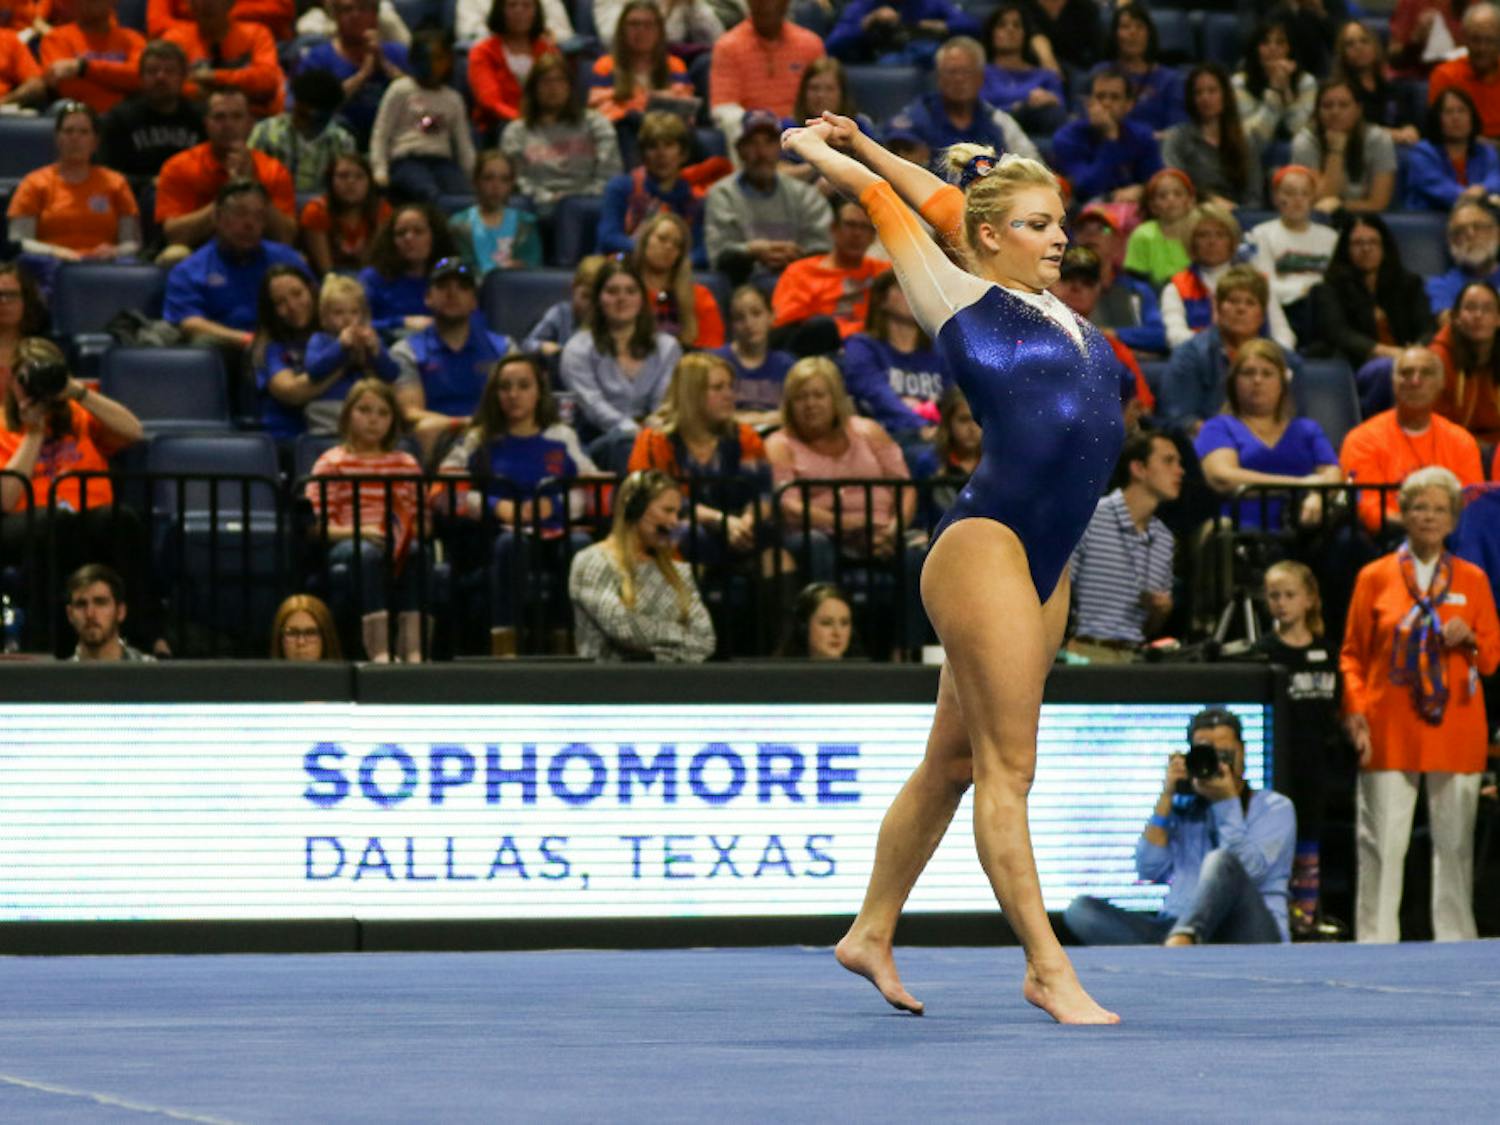 Sophomore gymnast Alyssa Baumann will go toe-to-toe with her sister, UGA freshman Rachel Baumann, tonight when the Gators host the Bulldogs in the O’Connell Center at 6:45. 